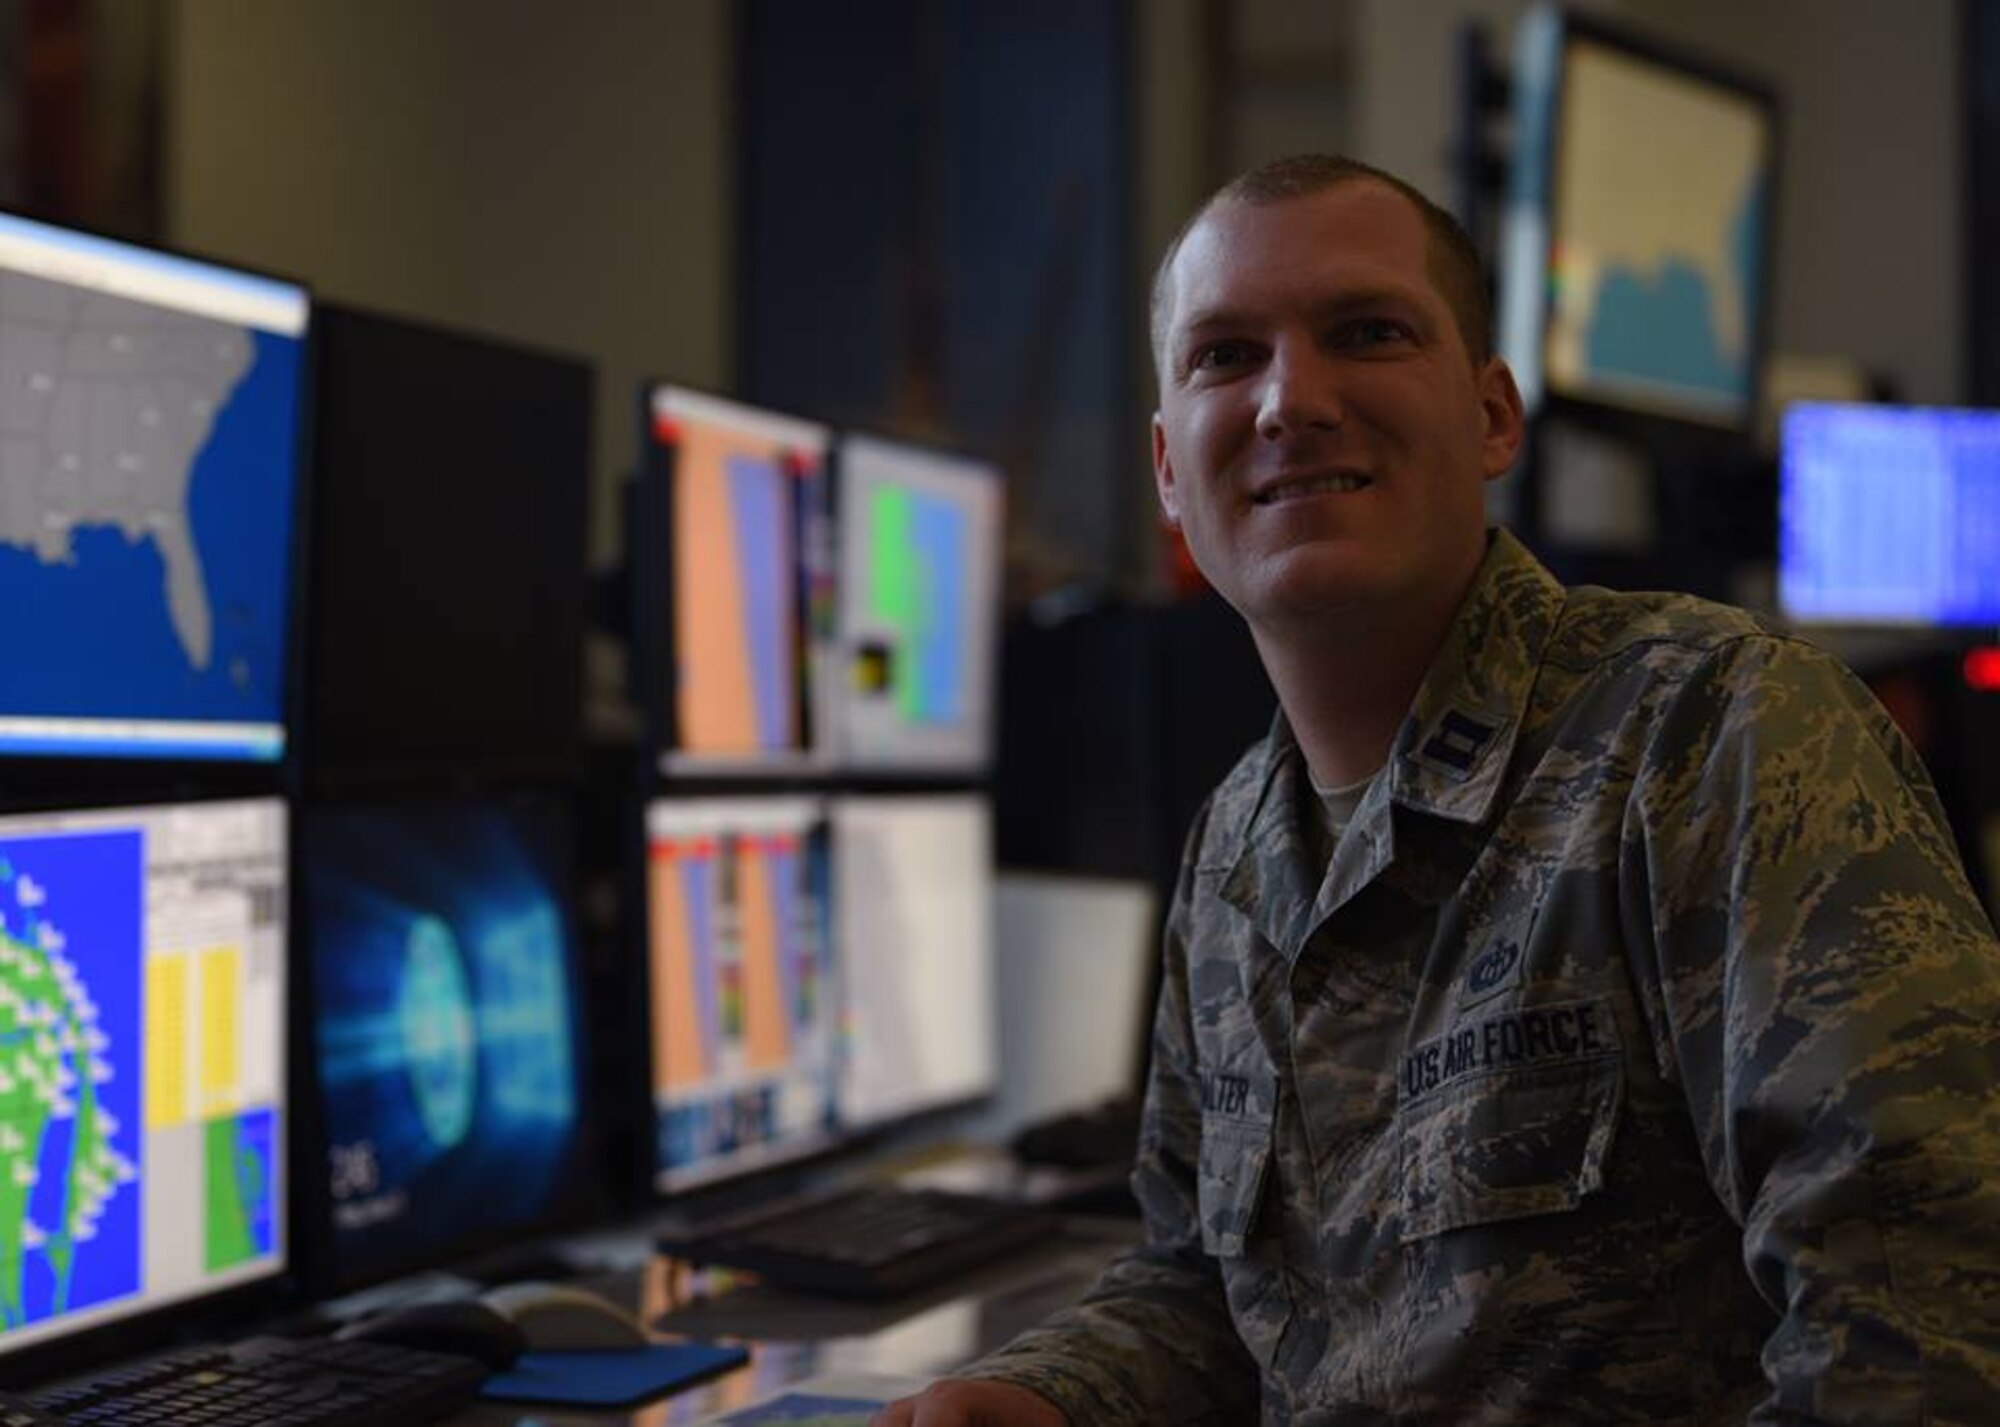 Capt. Matthew Walter, 45th Weather Squadron Airfield and Range Weather Operations flight commander, poses for a photo in the Morrell Operations Center on Jan. 11, 2019, at Cape Canaveral Air Force Station, Fla. Walter is a weather officer who is passionate about severe weather awareness due to experiencing a tornado on his family farm as a child. (U.S. Air Force photo by Airman 1st Class Zoe Thacker)